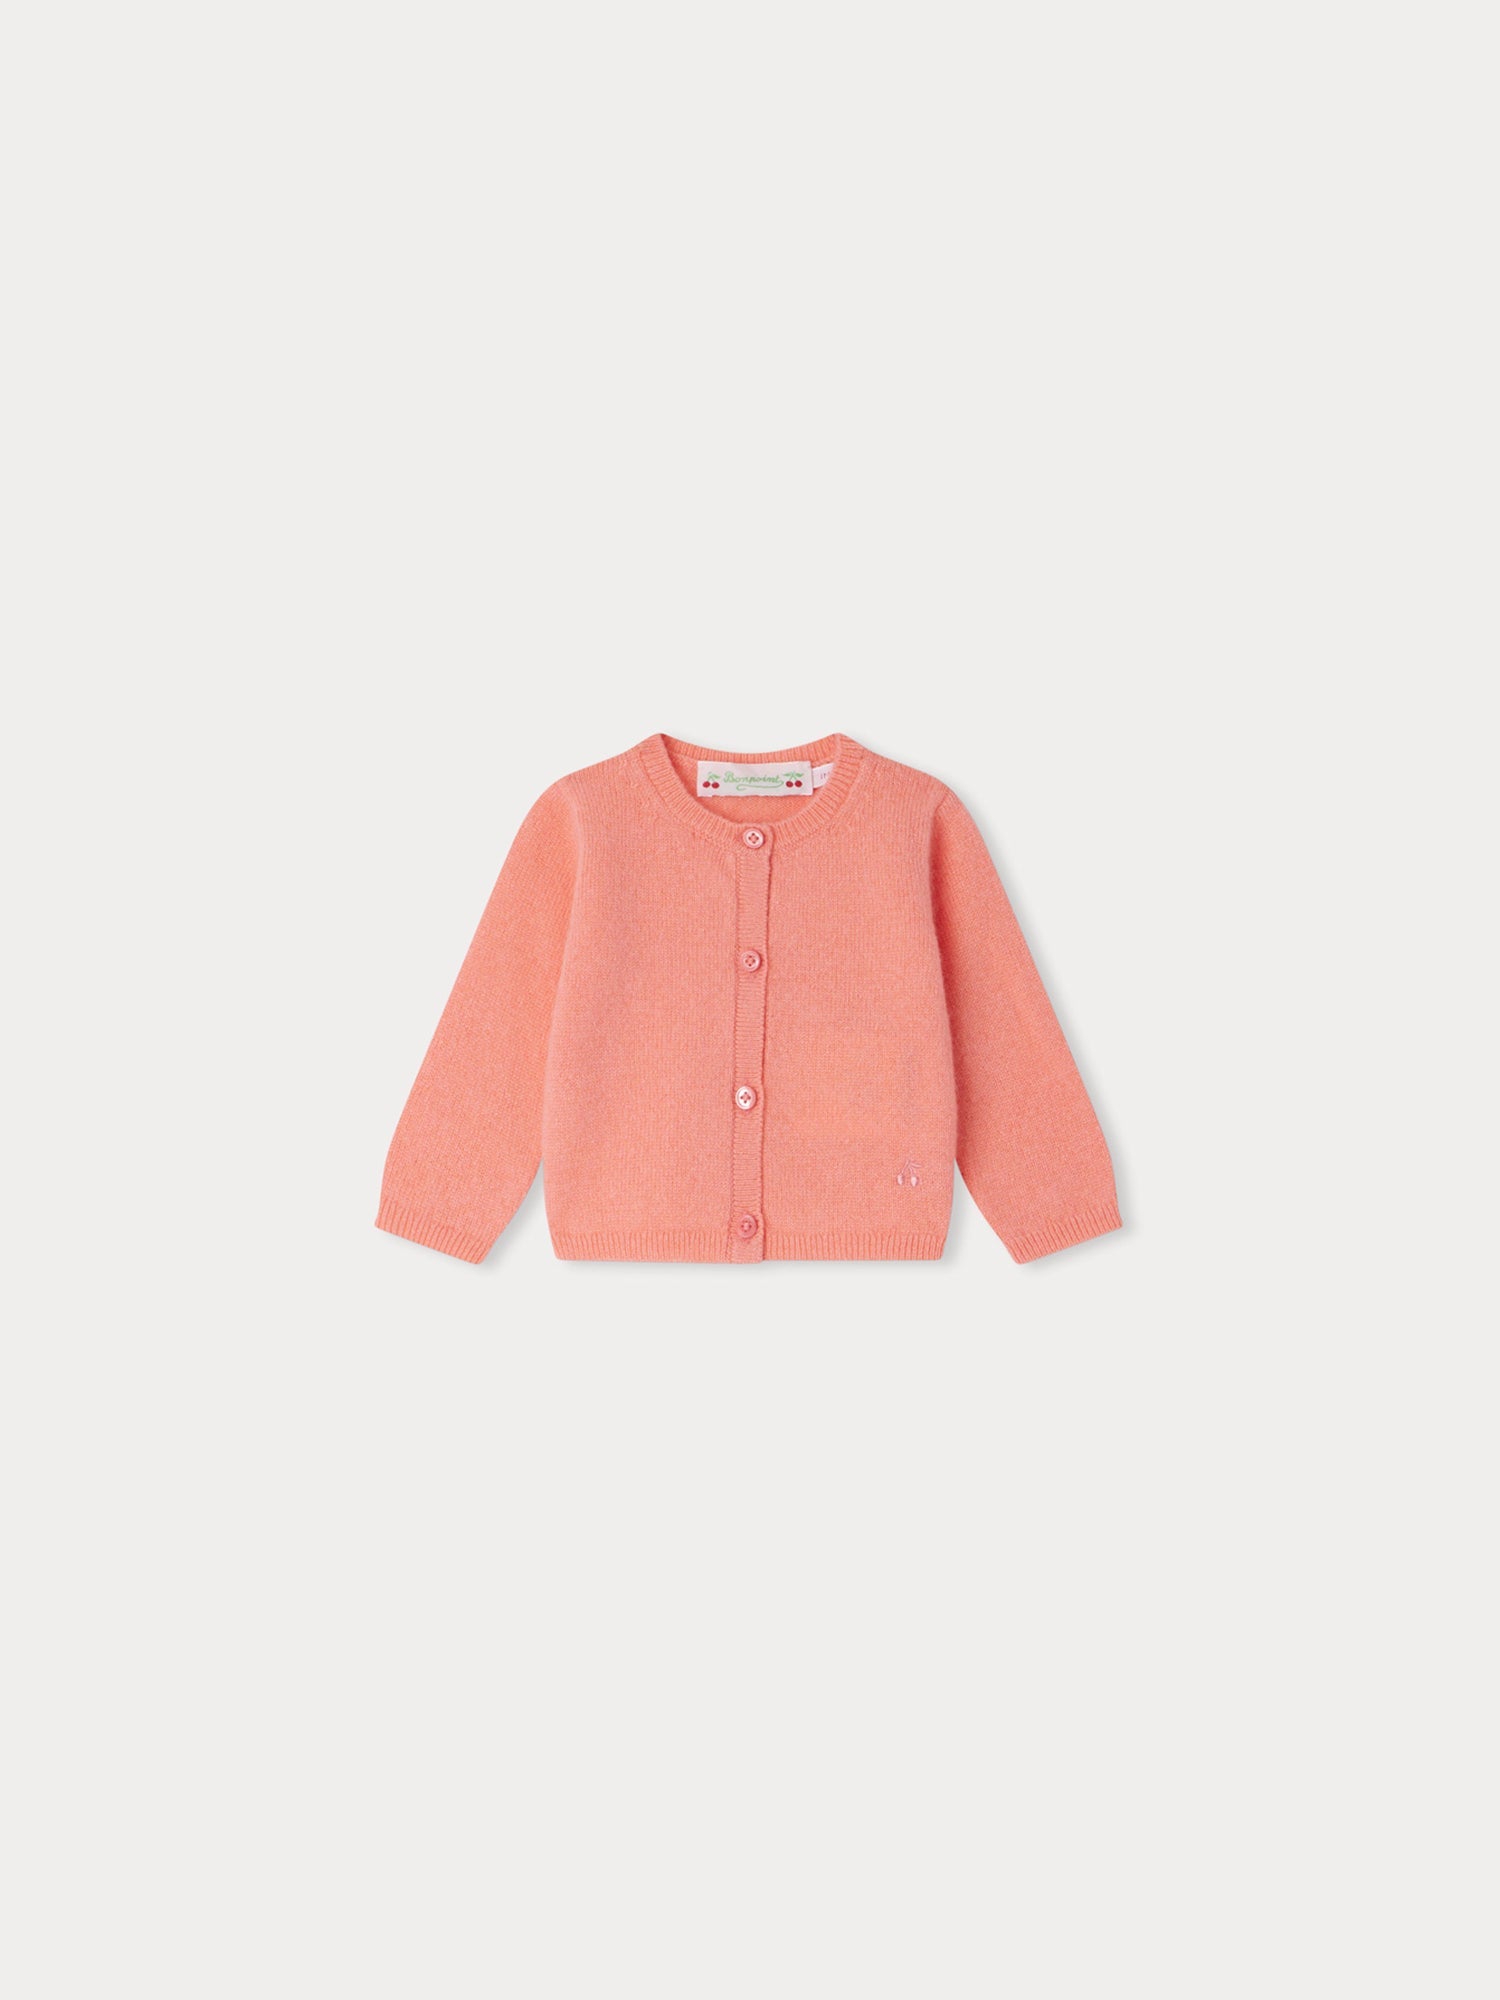 Baby Girls Coral Cashmere Cardigan